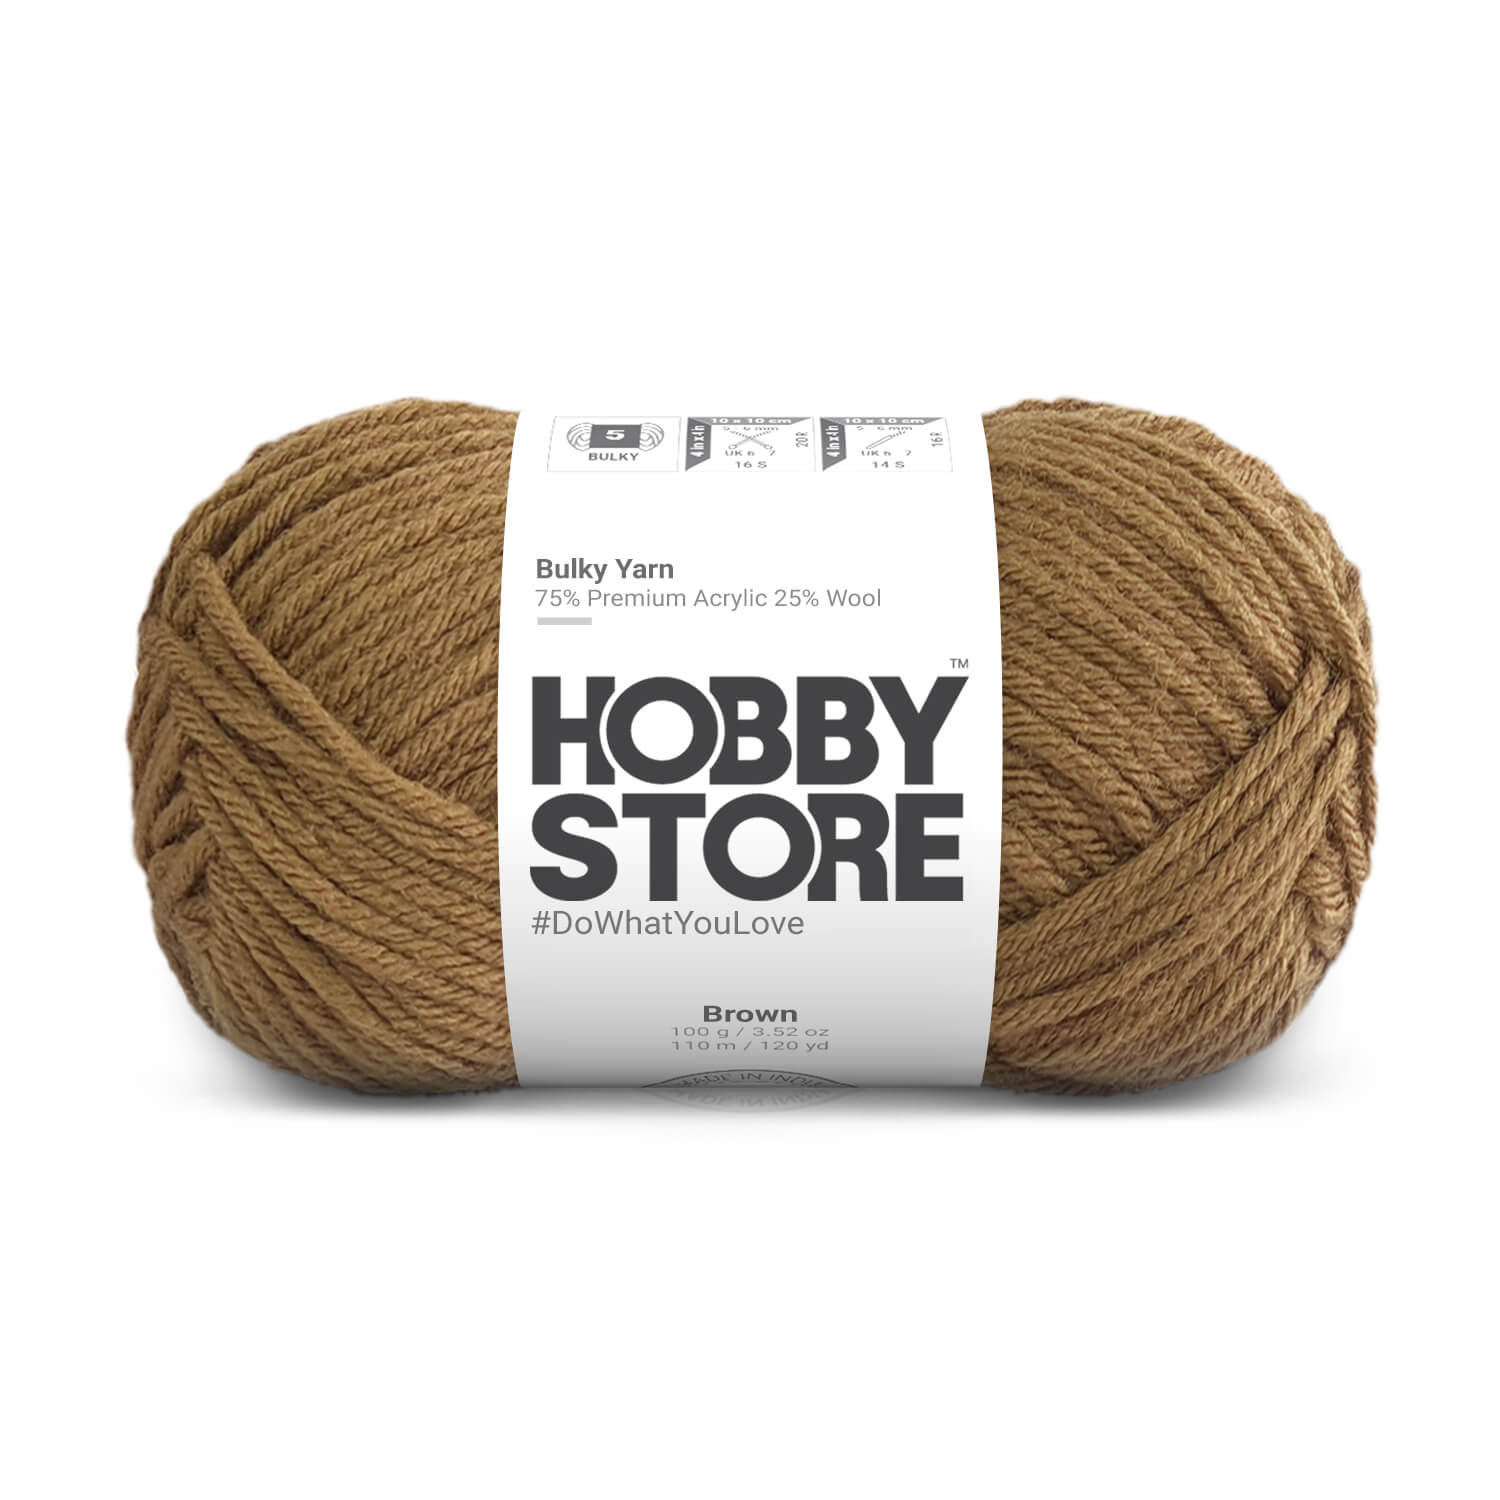 Bulky Yarn by Hobby Store - Brown 6007